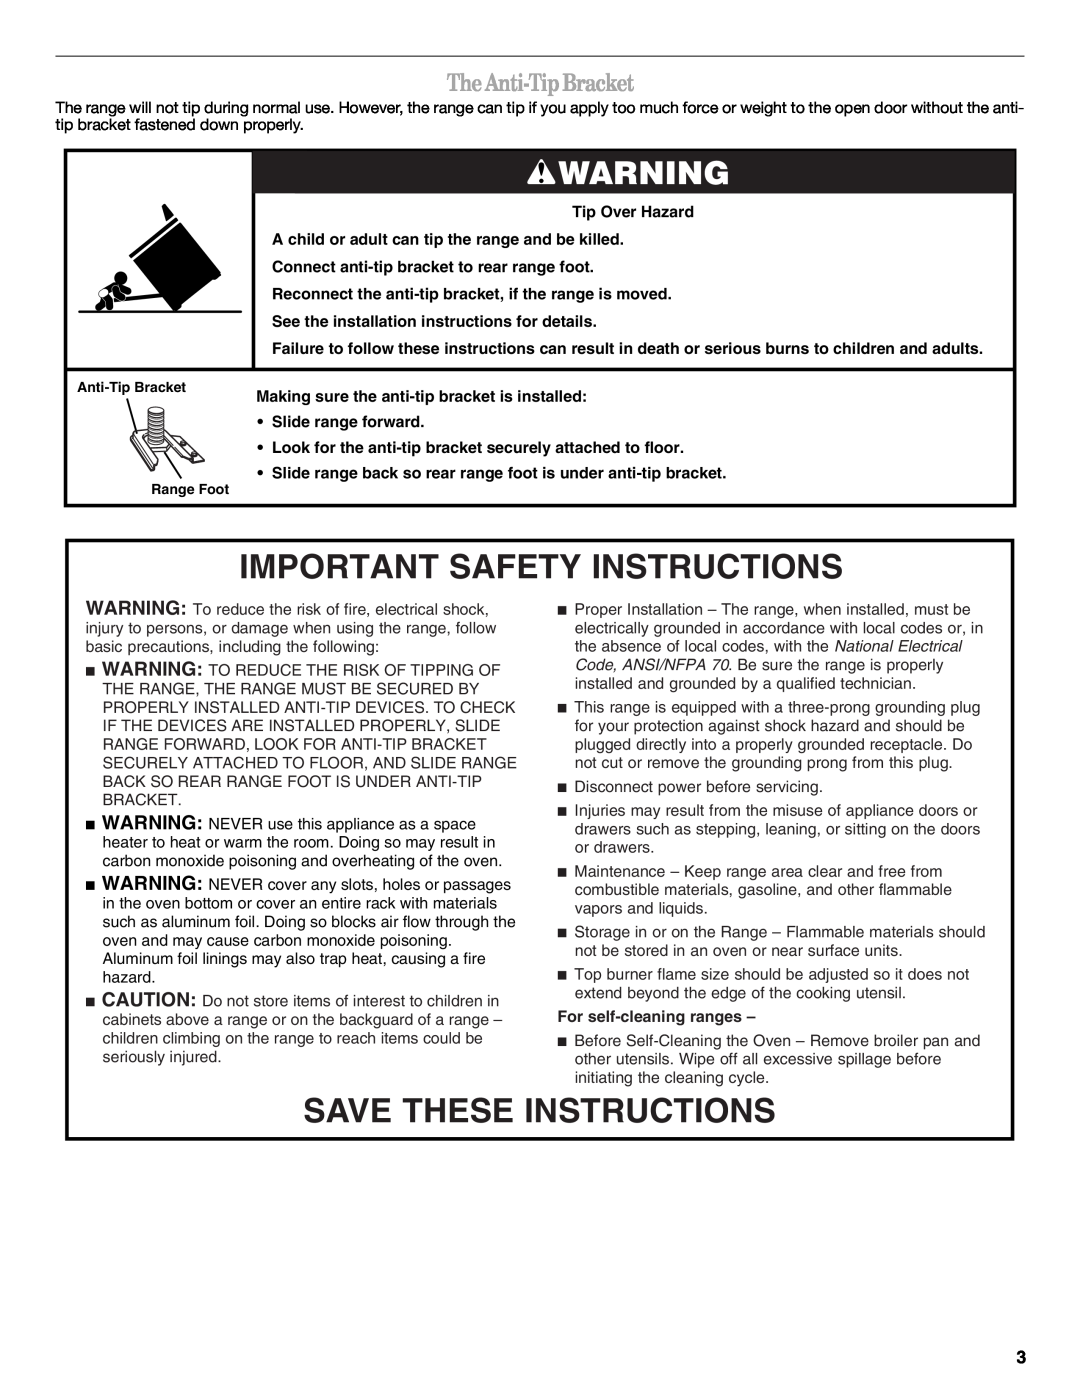 Amana W10196156A TheAnti-TipBracket, Important Safety Instructions, Save These Instructions, For self-cleaning ranges 